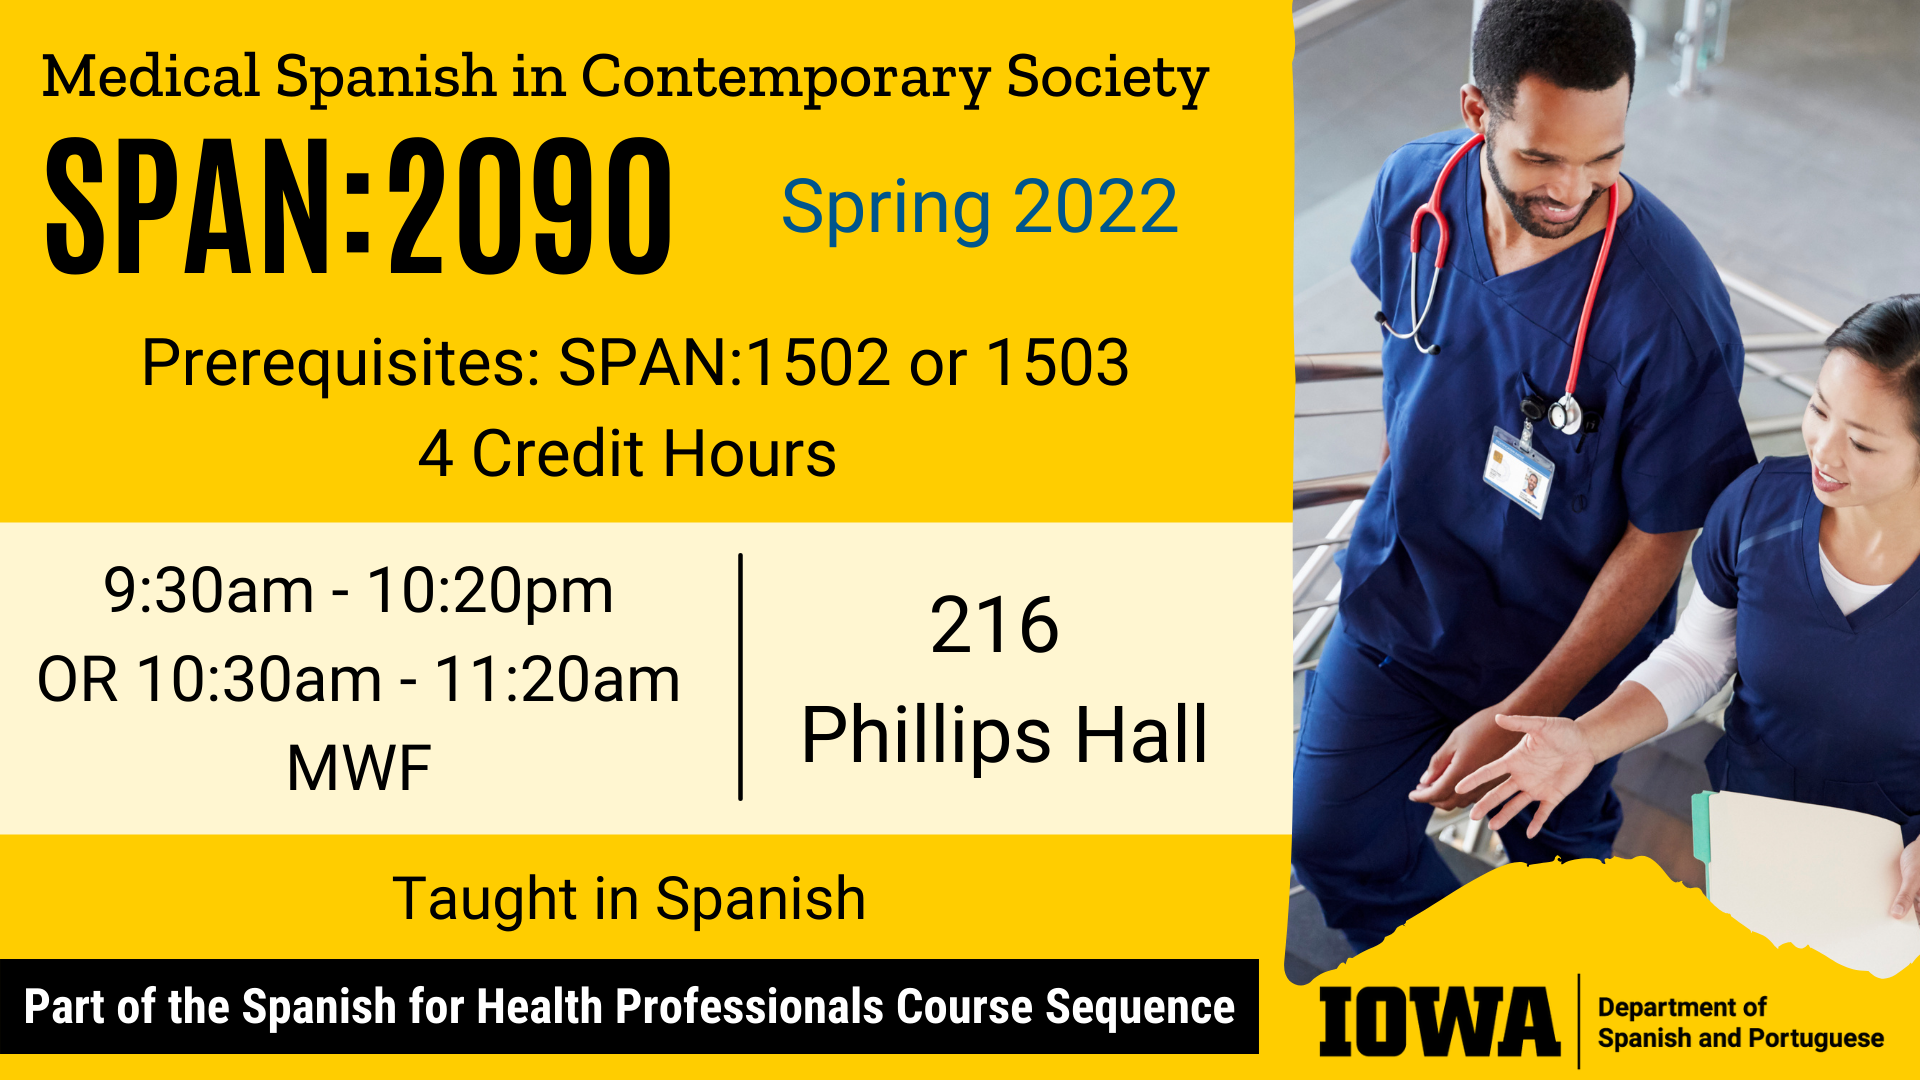 Medical Spanish in Contemporary Society SPAN 2090 happening in Spring 2022. Prerequisites: SPAN 1502 or 1503 4 Credit Hours. Two sections at 9:30am - 10:20pm or 10:30am - 11:20am on Monday, Wednesday, Friday in 216 Phillips Hall. Taught in Spanish. Part of the Spanish for Health Professionals Course Sequence.